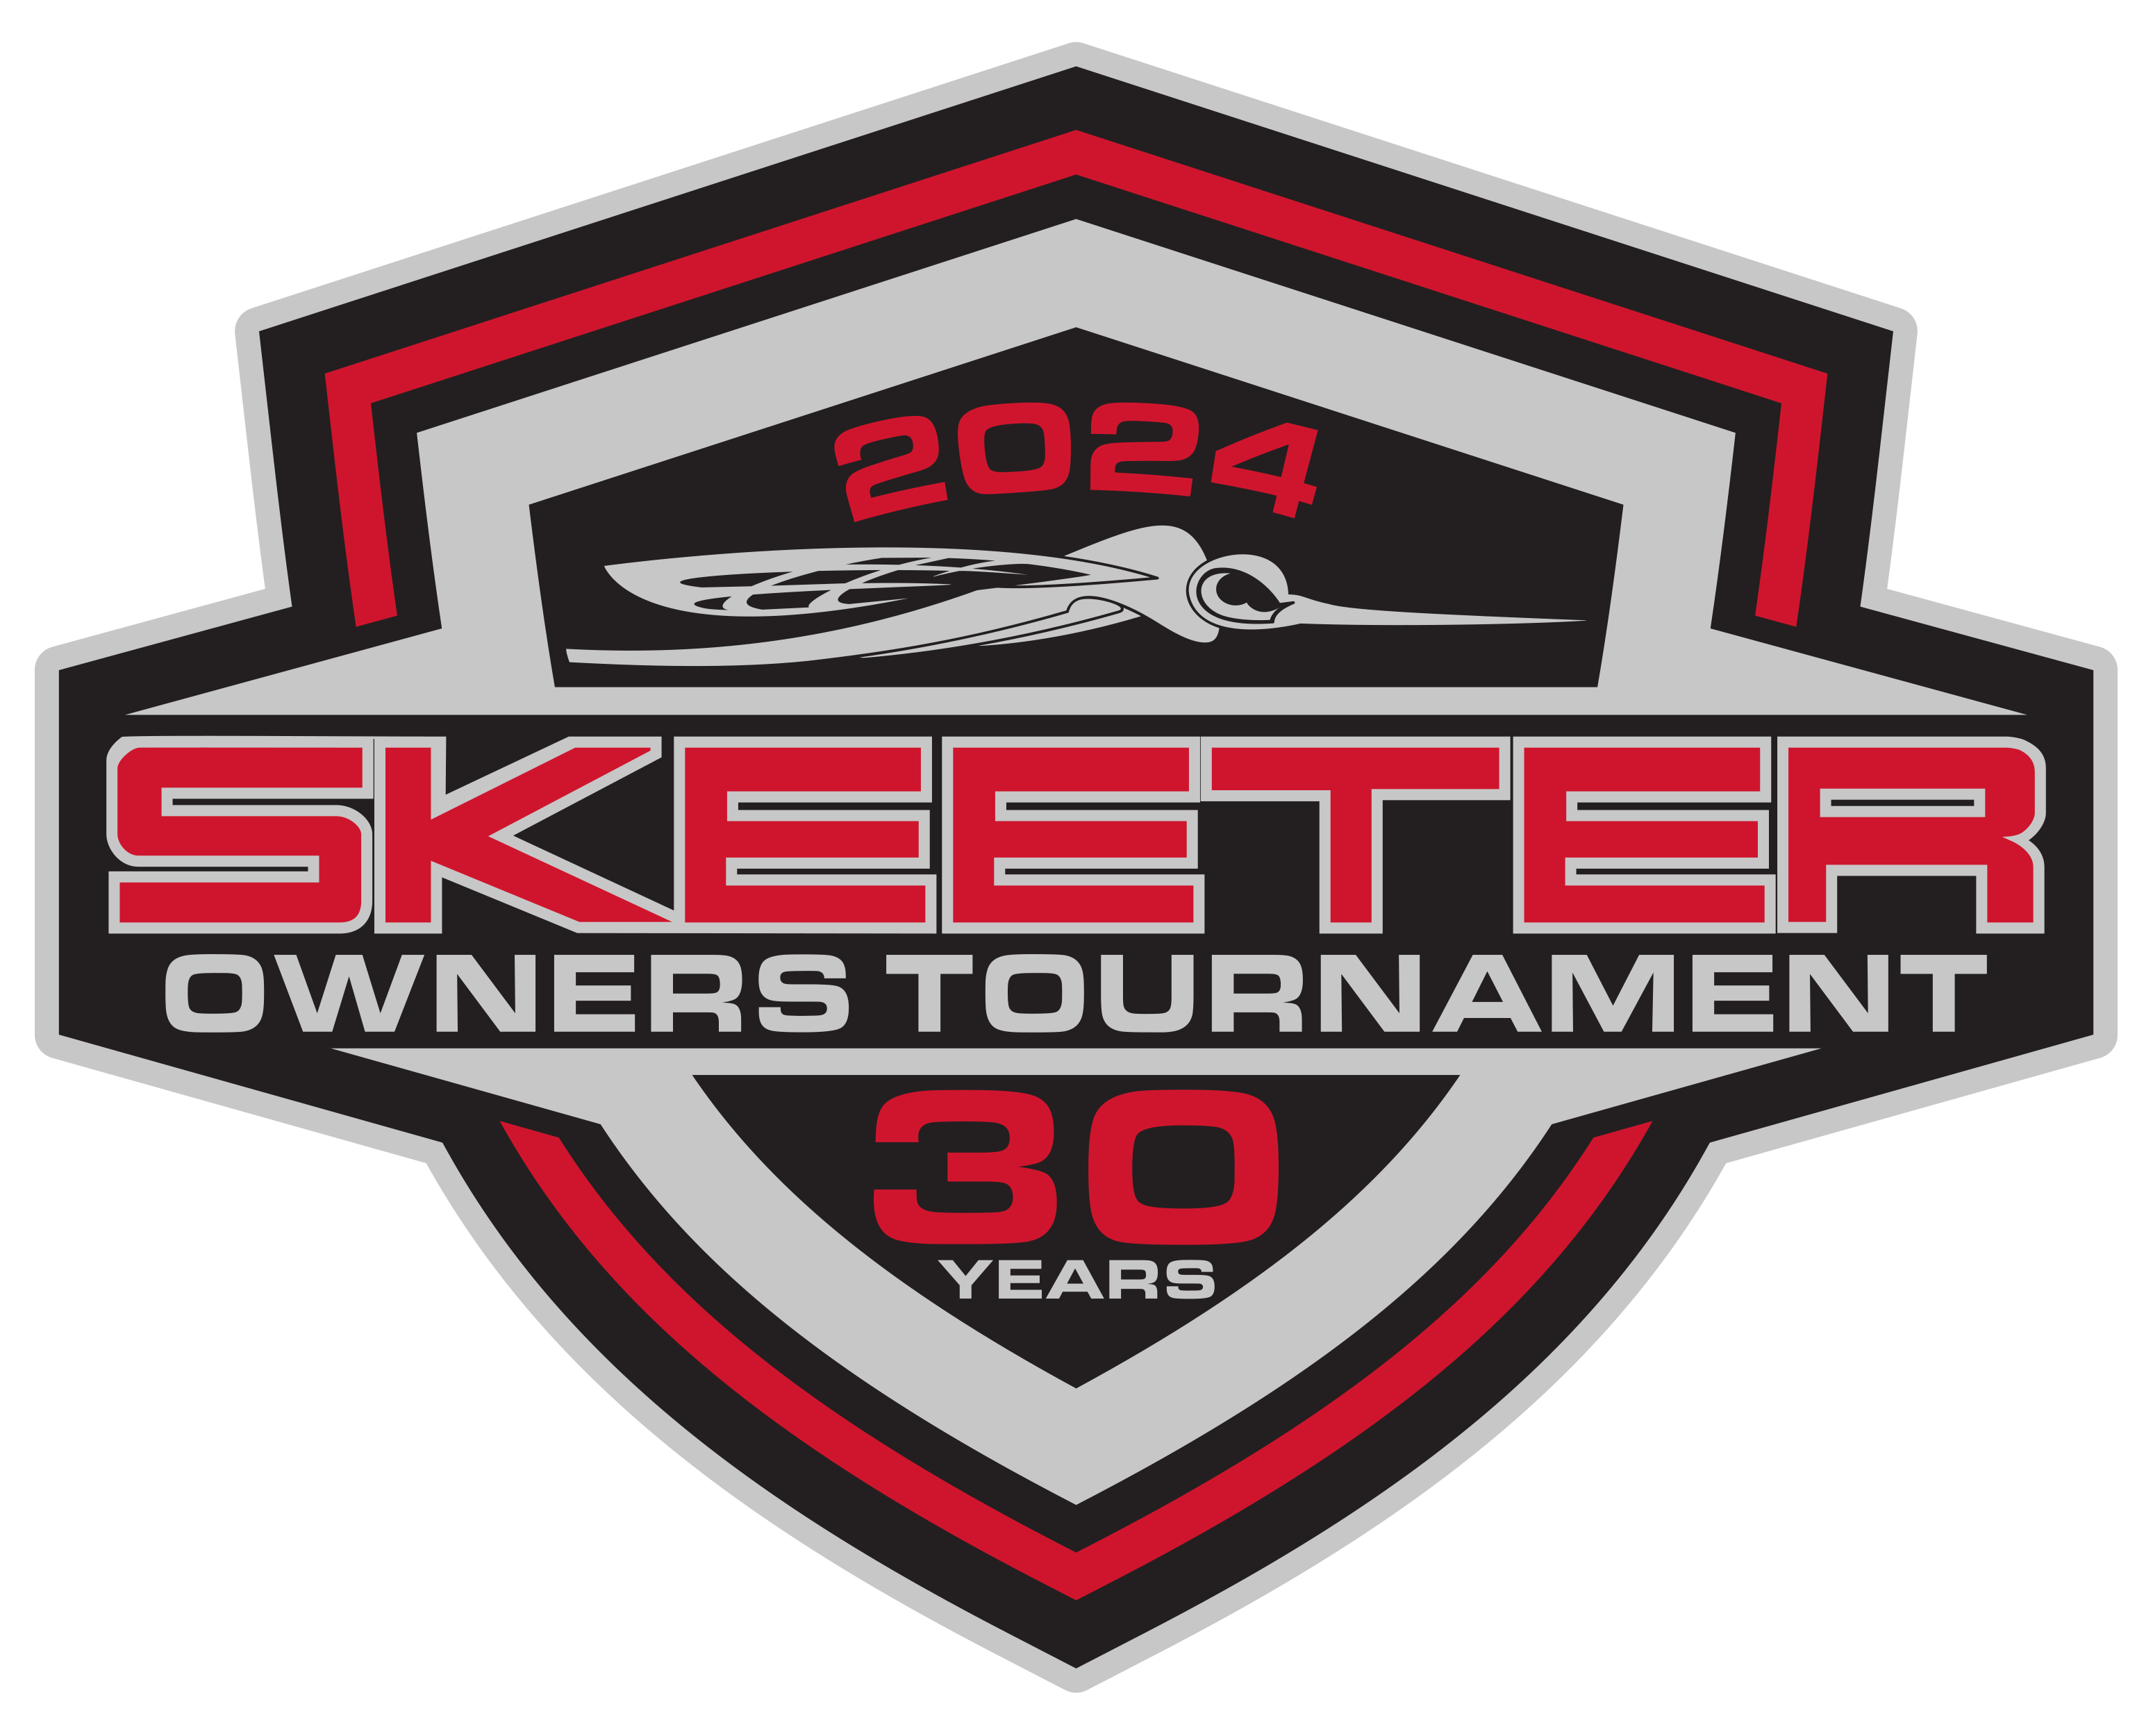 Owners Tournament Logo